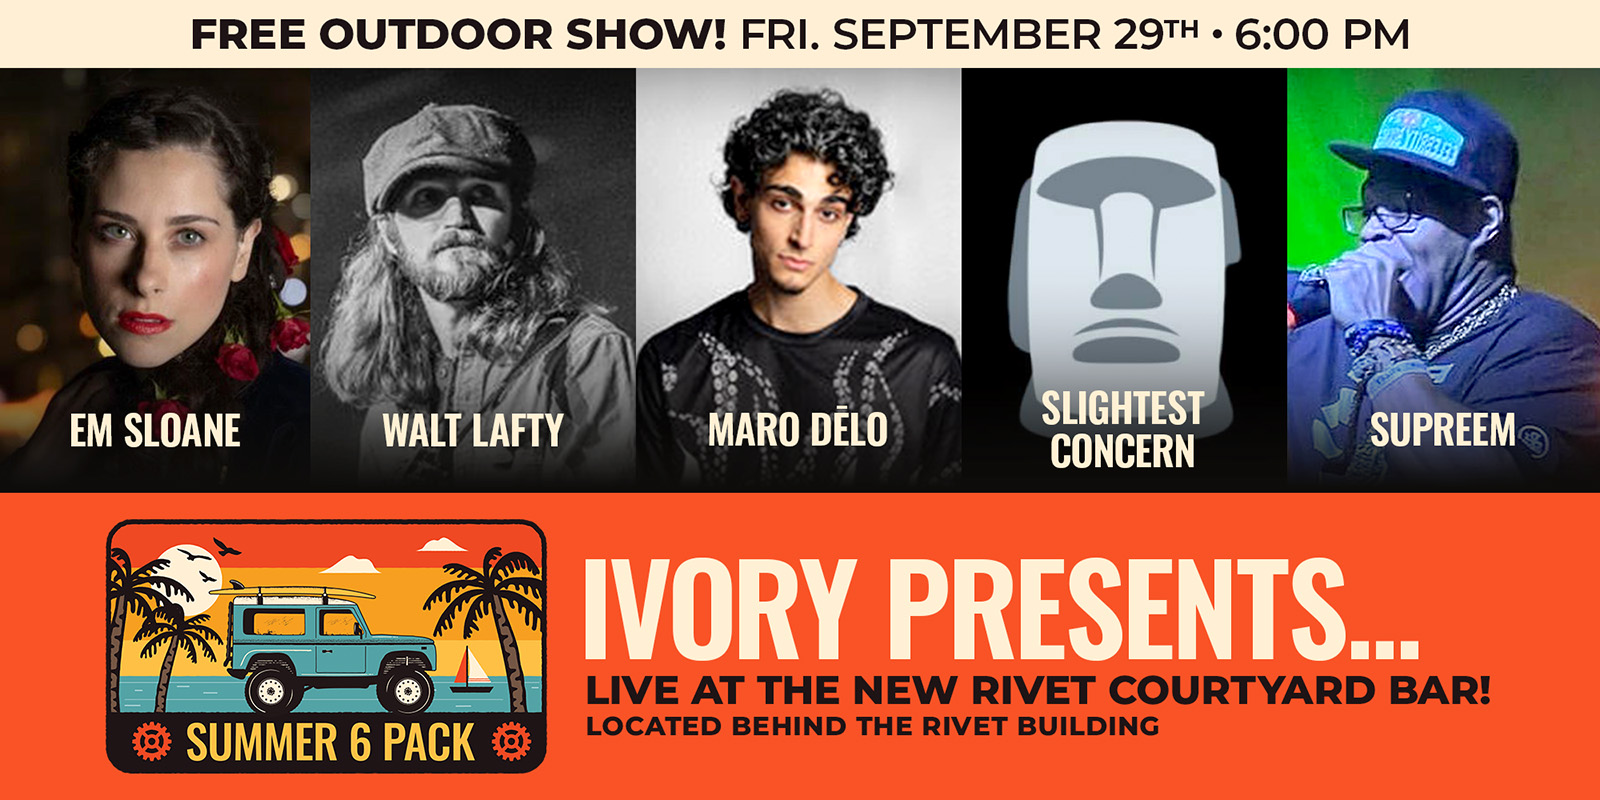 Ivory Presents: Outdoor Show at Rivet w/ Em Sloane, Walt Lafty, Maro DēLo, Slightest Concern & Supreem on Friday, September 29th! Join us at this FREE all ages event! (21+ w/ID to drink)